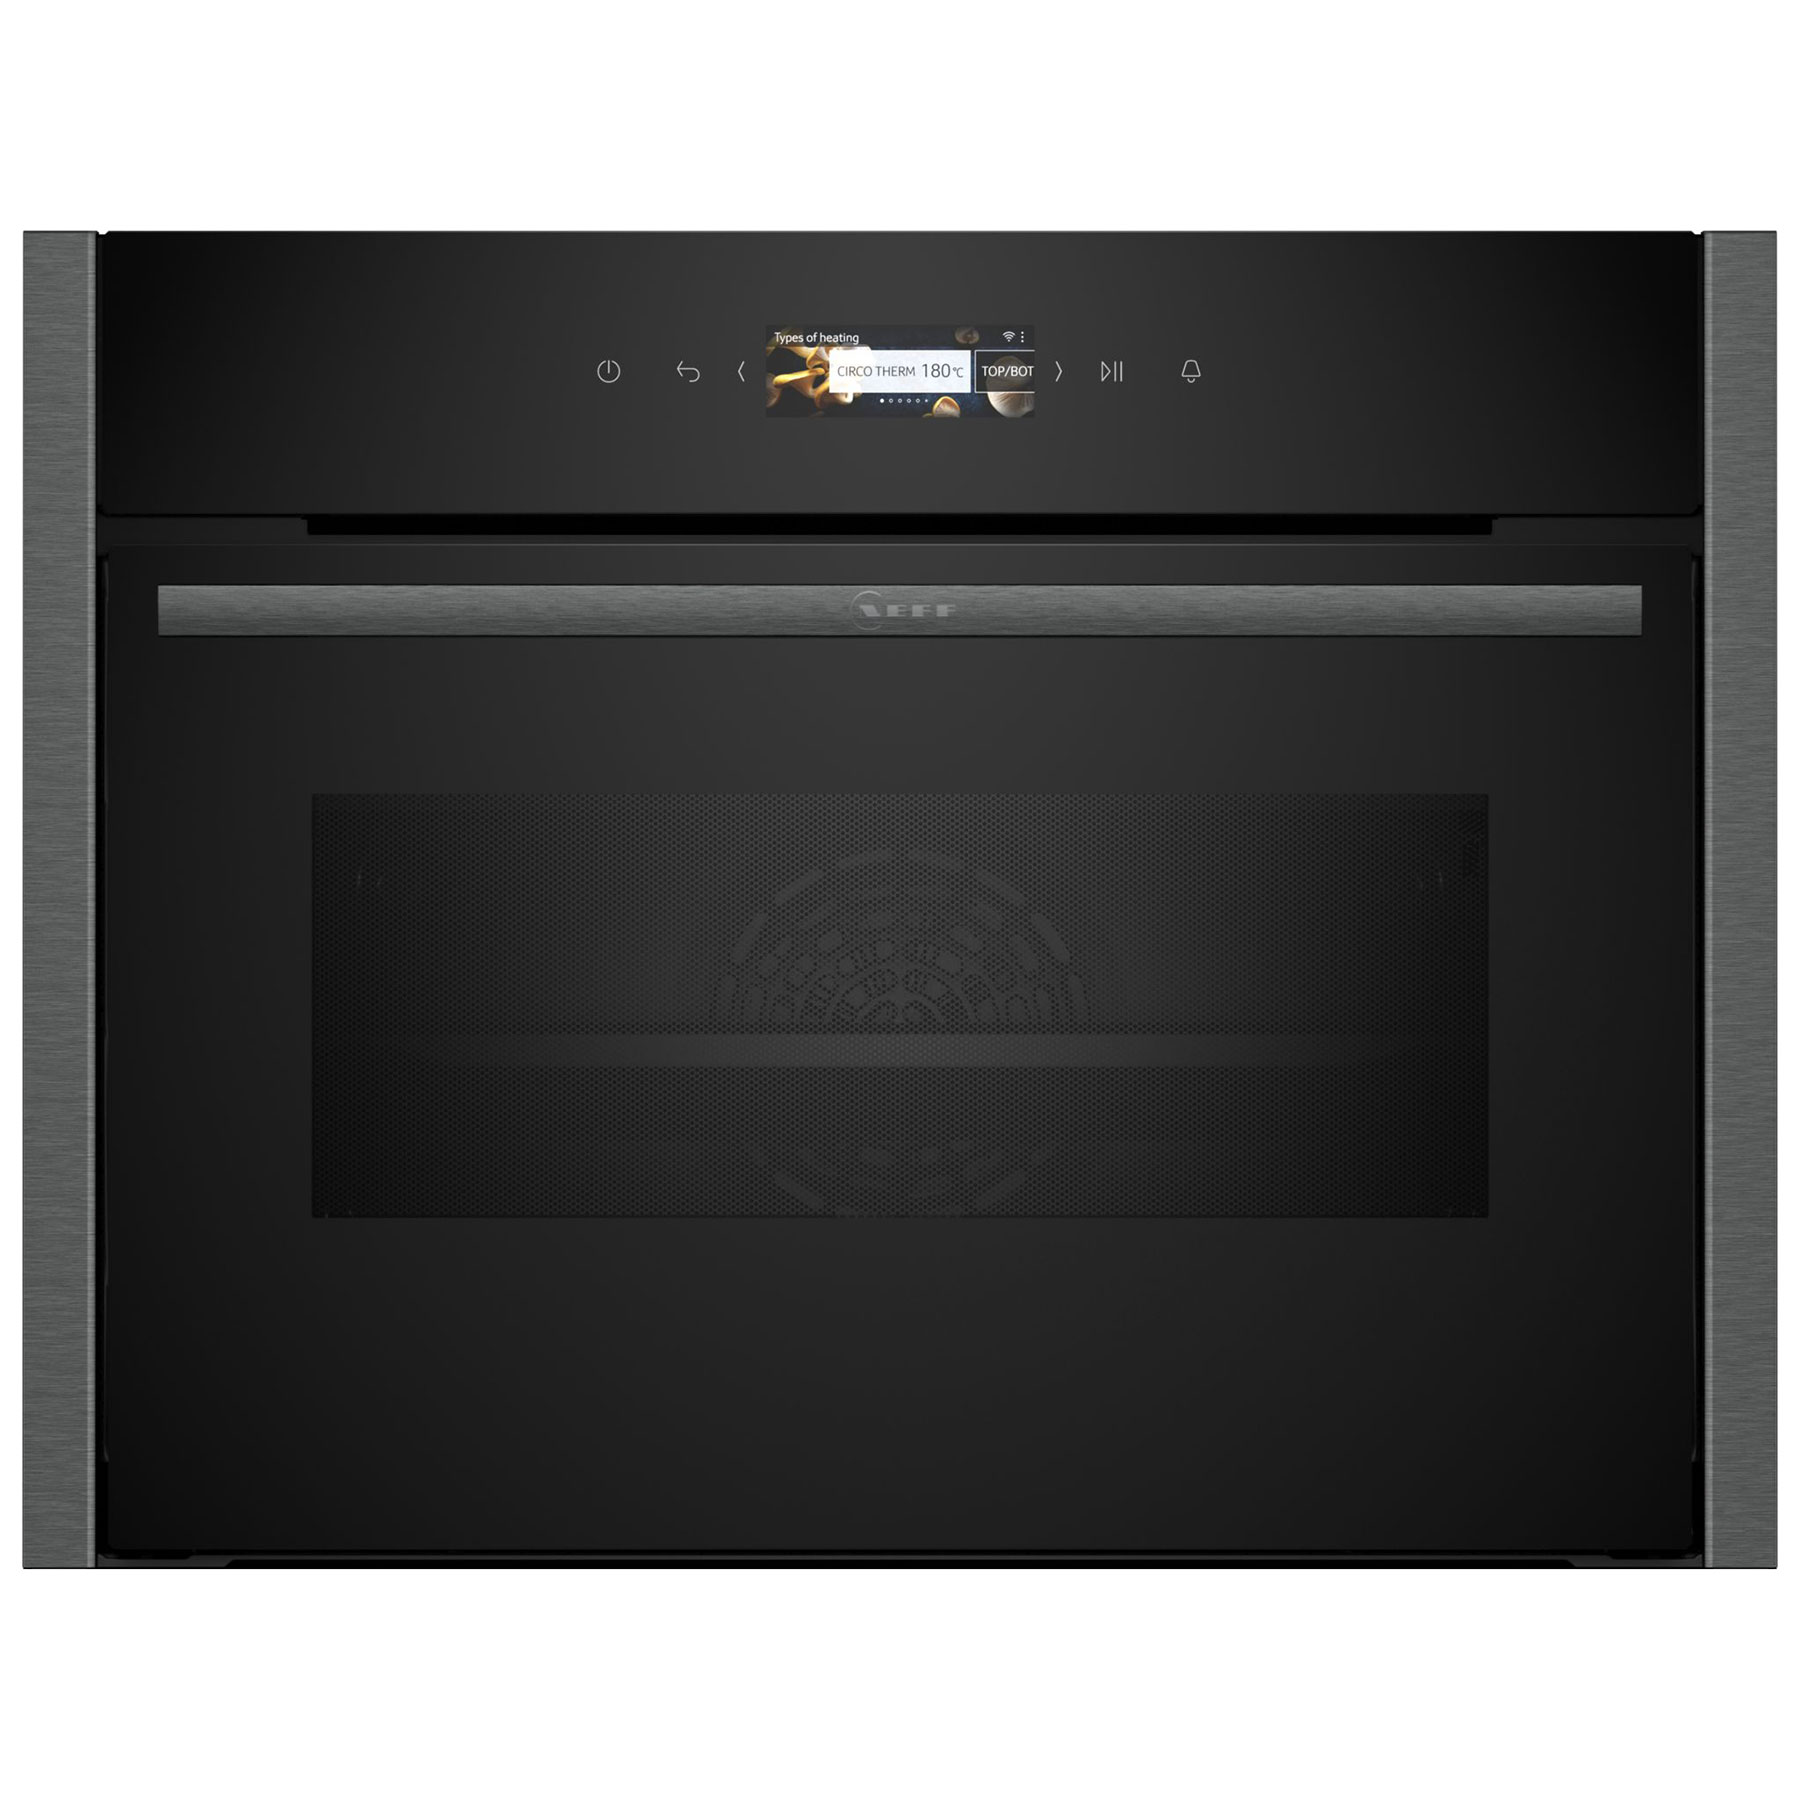 Image of Neff C24MR21G0B N70 Built In Compact Oven Microwave in Black 45L